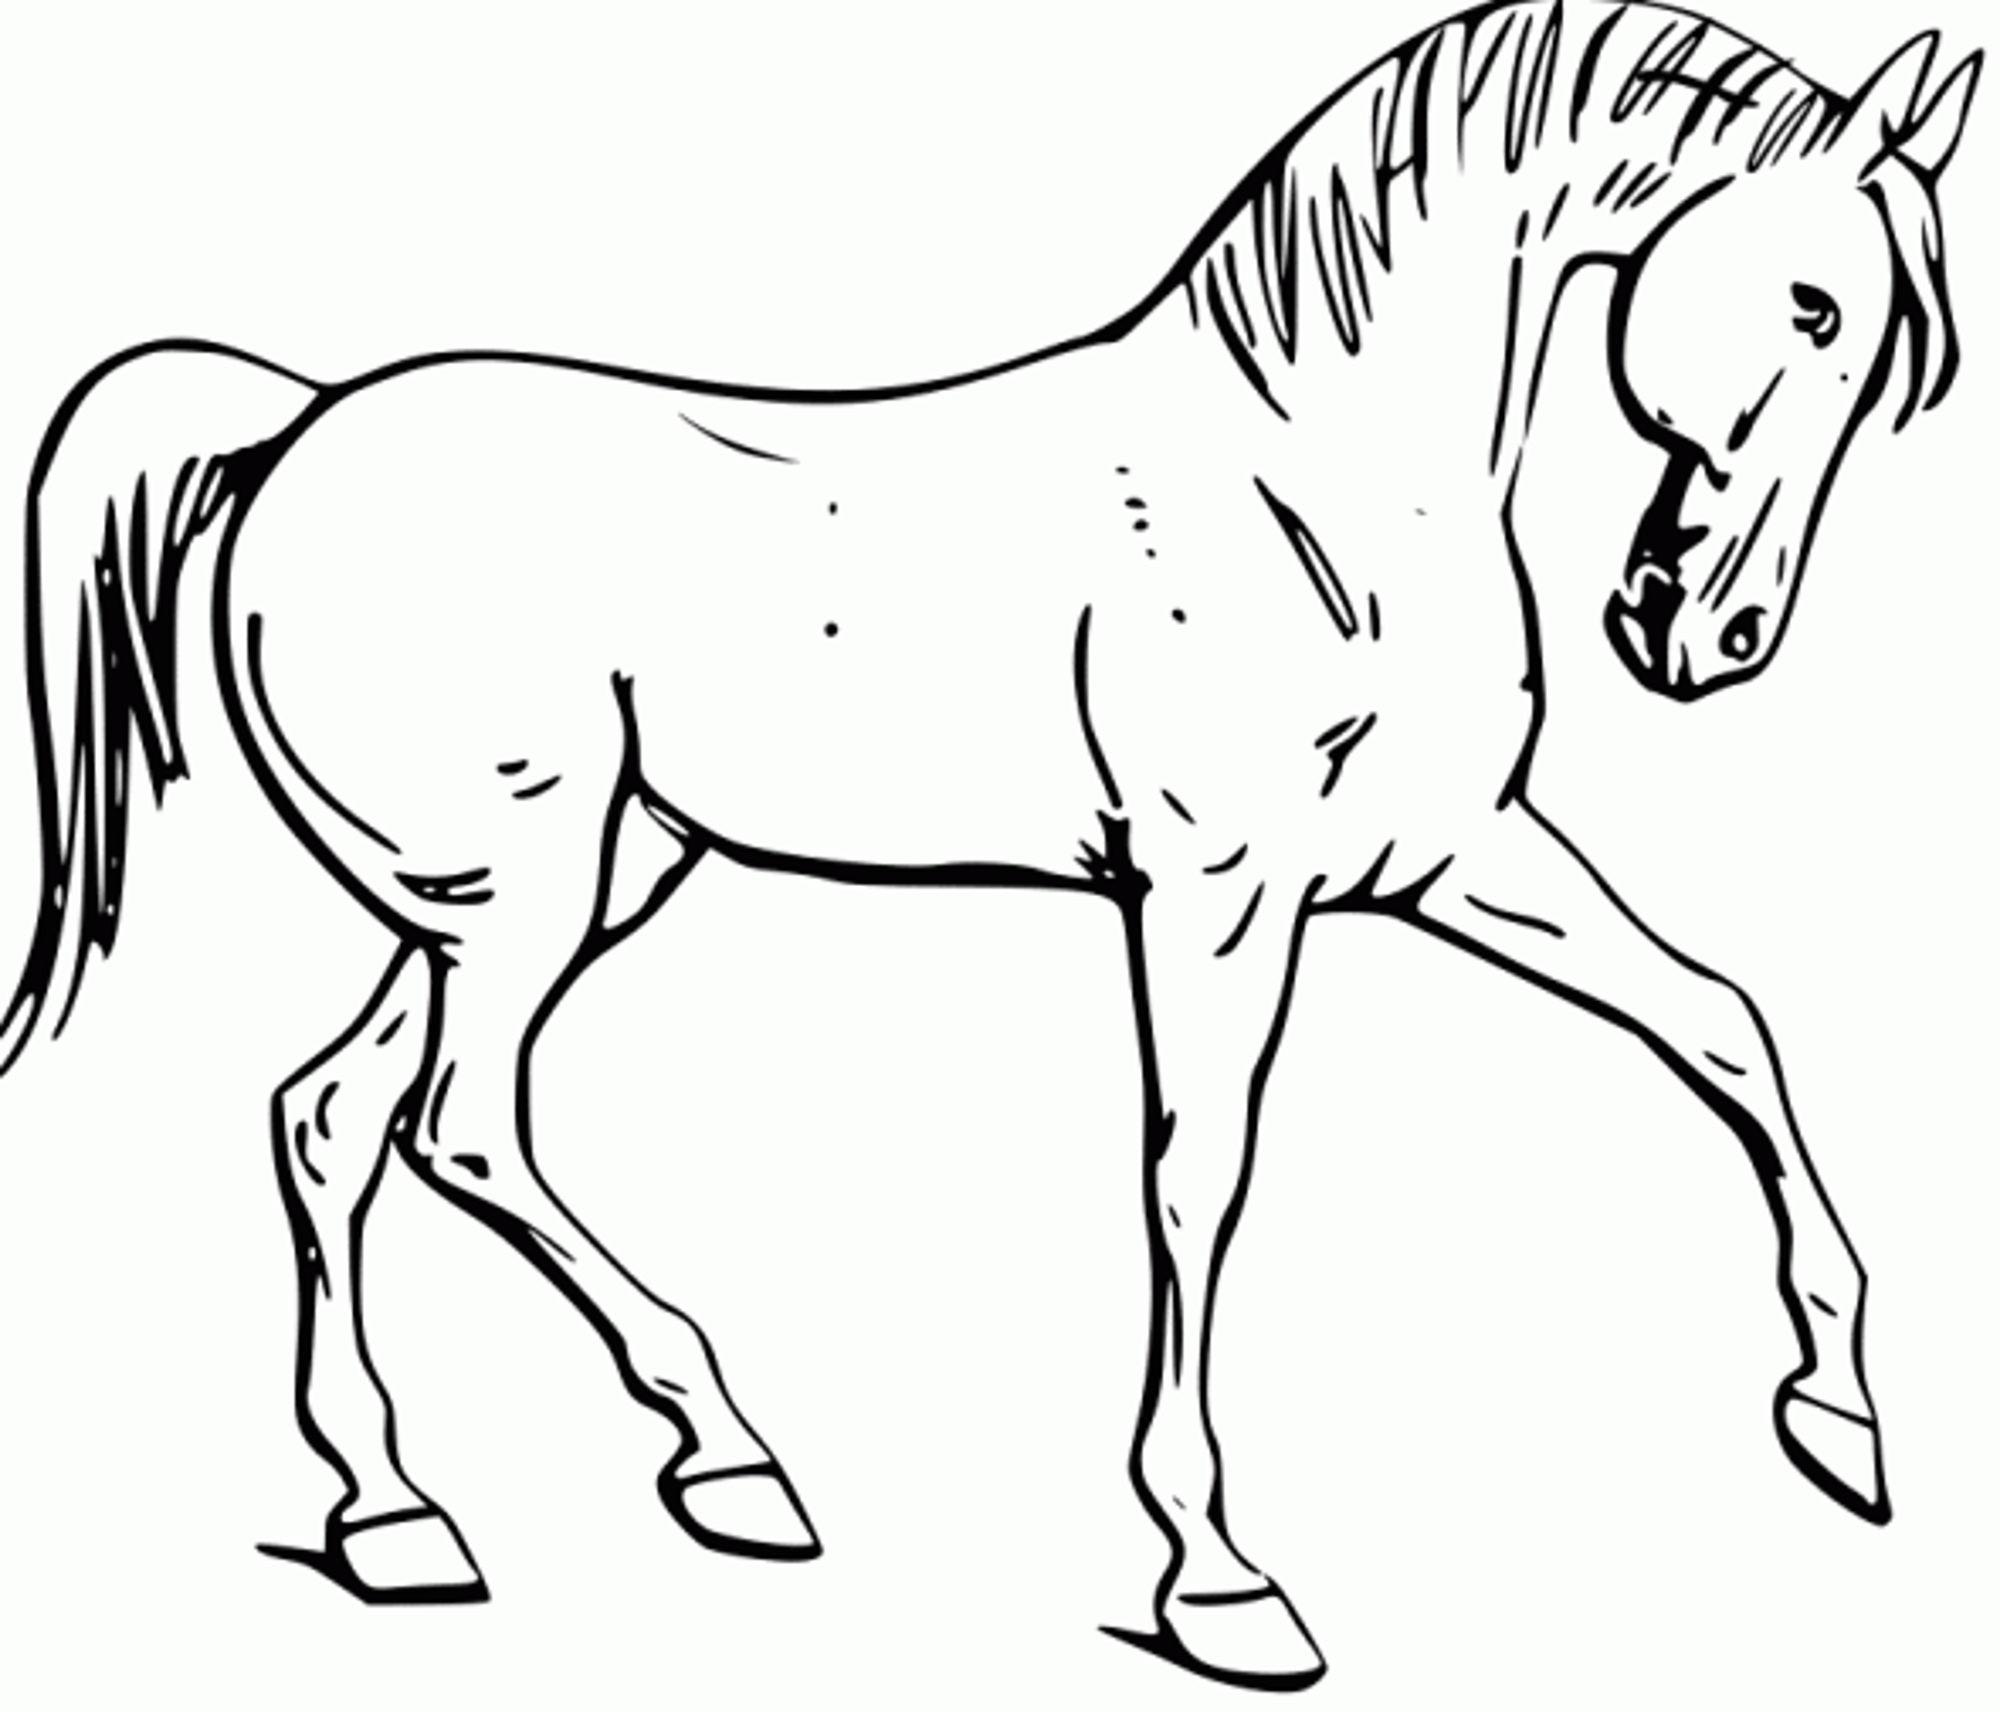 Fun Horse Coloring Pages For Your Kids Printable - Free Printable Horse Coloring Pages